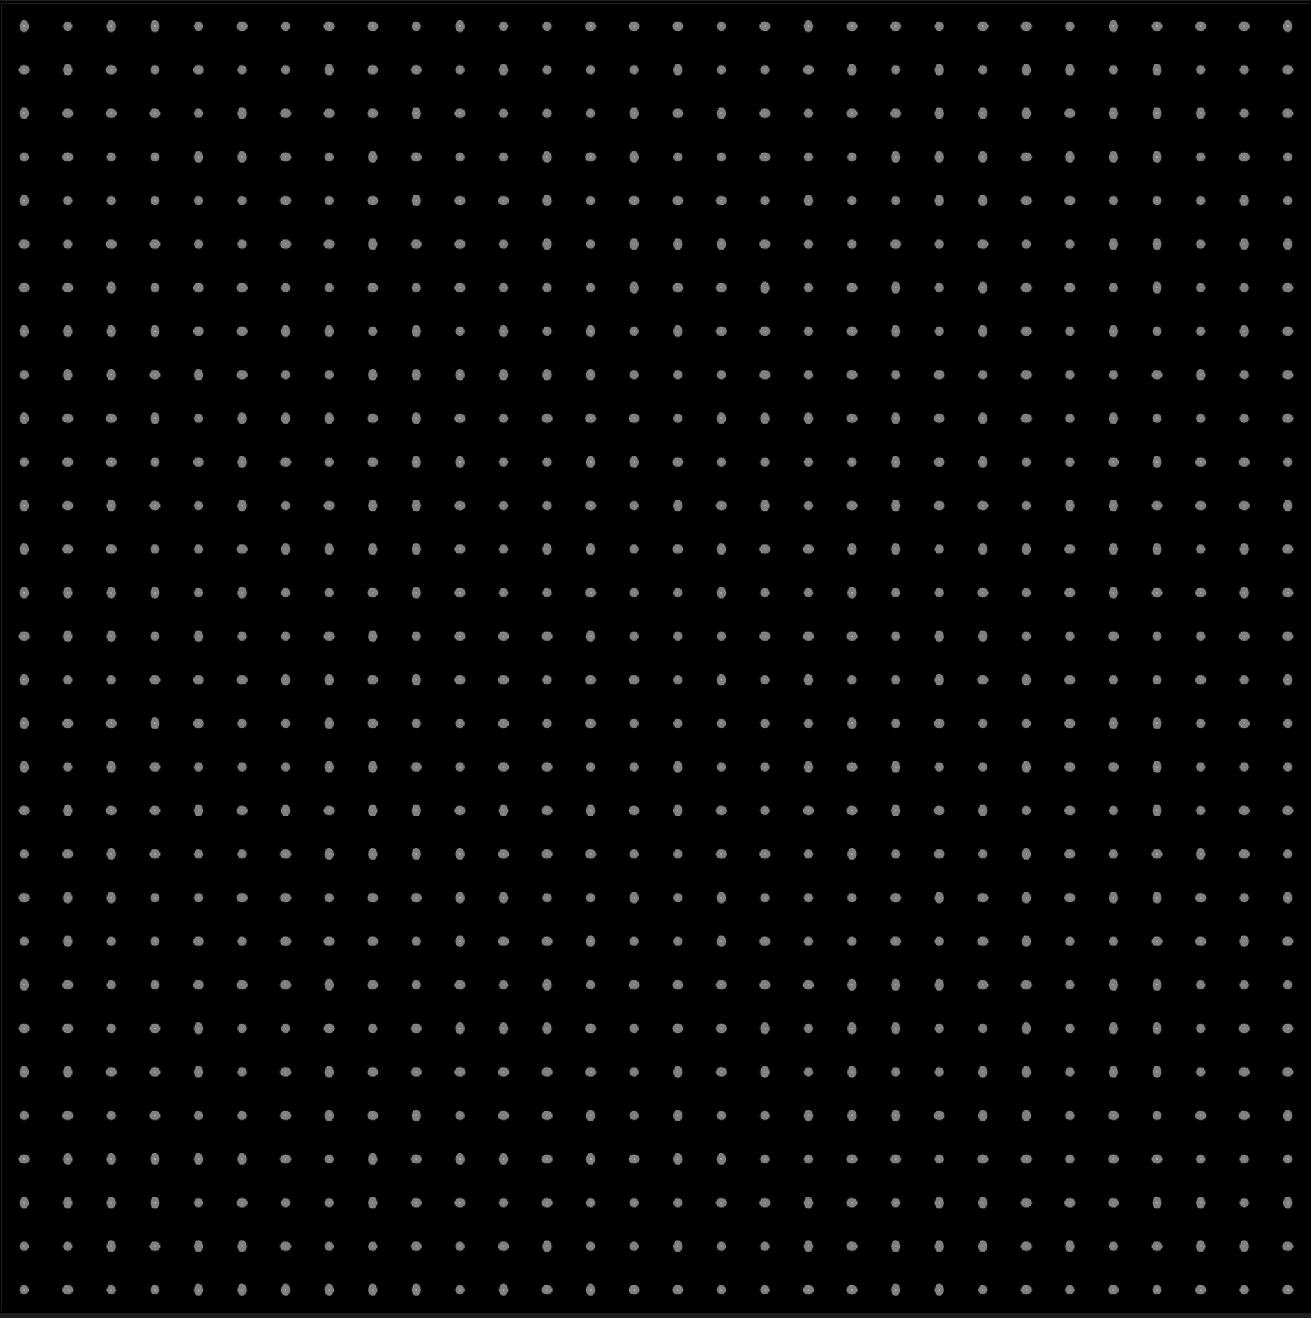 A grid of plain gray dots on a black background.